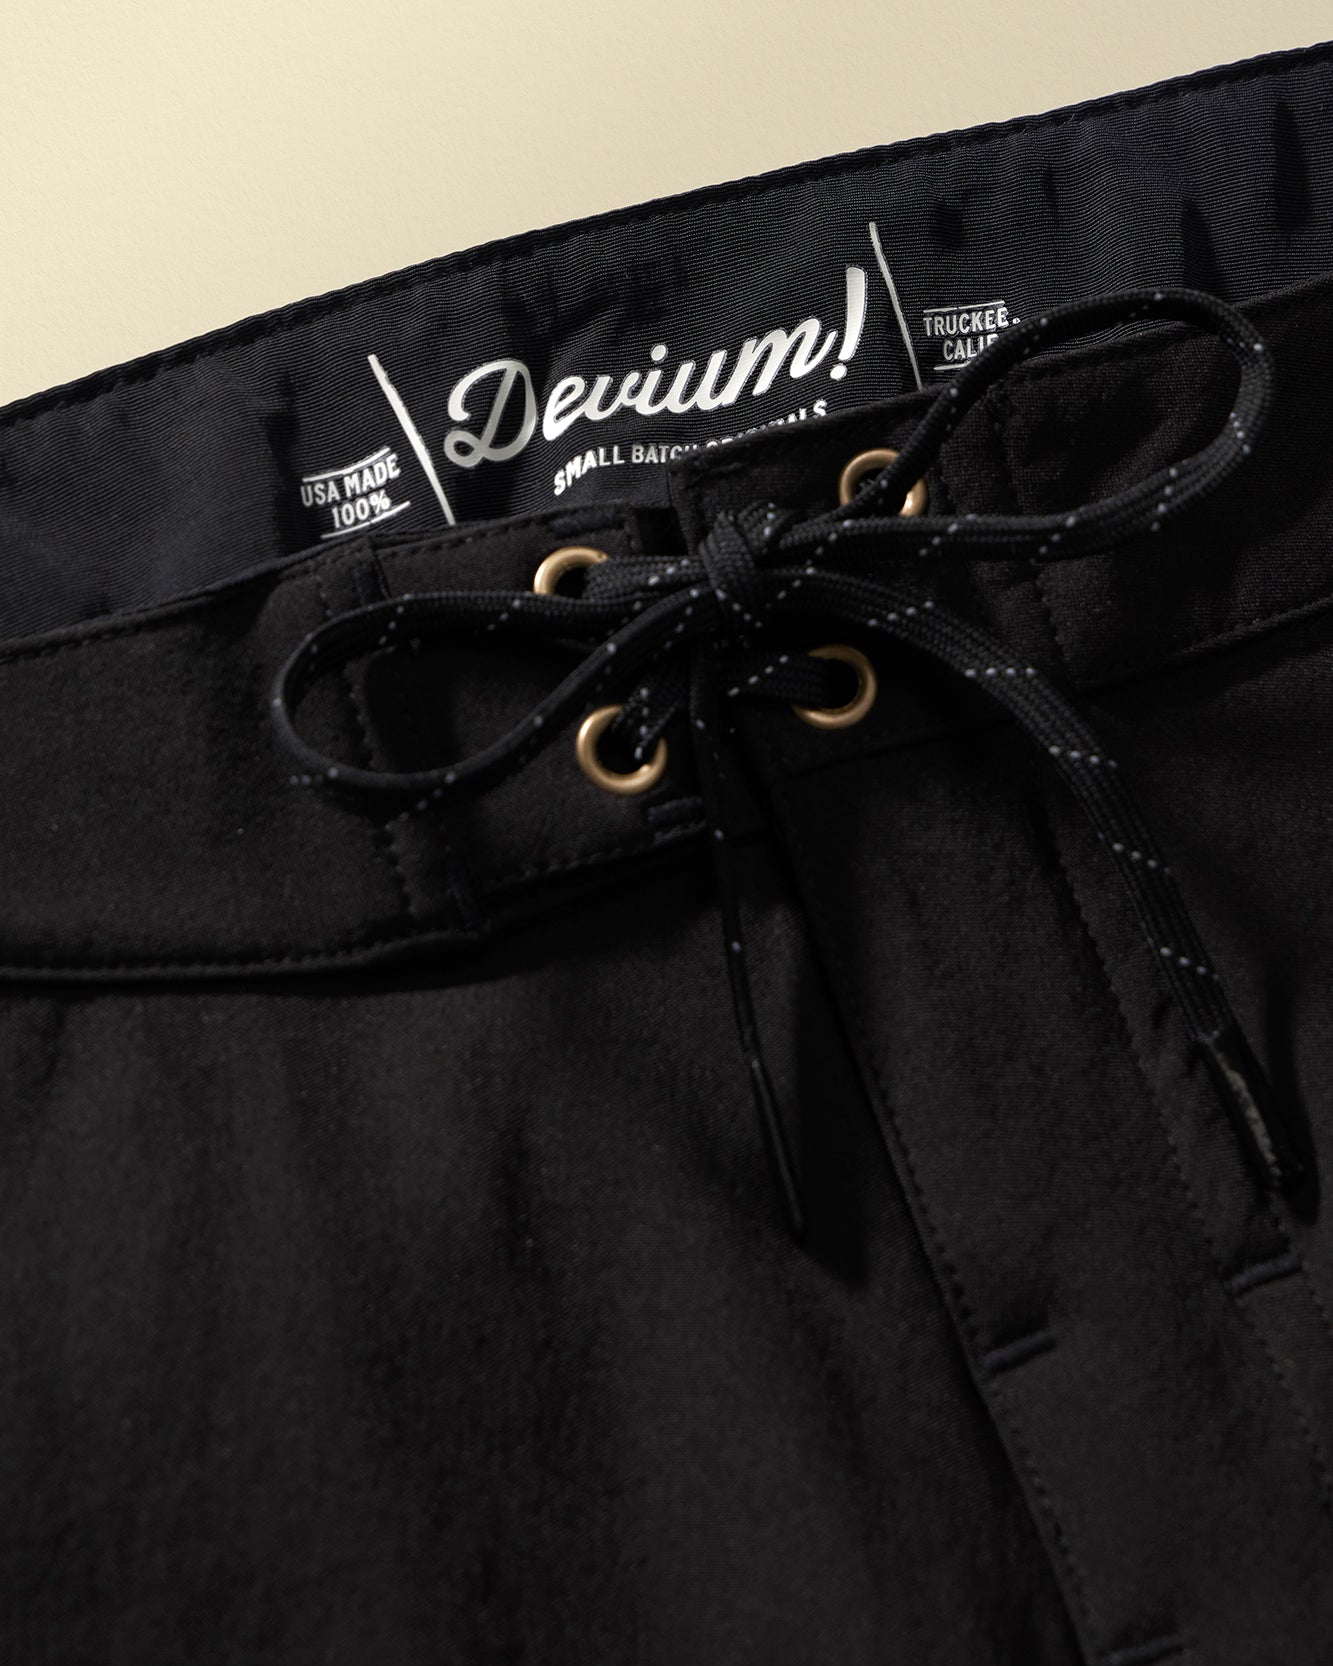 The Brotherhood Utility Trunks - Russell Surfboards x Devium